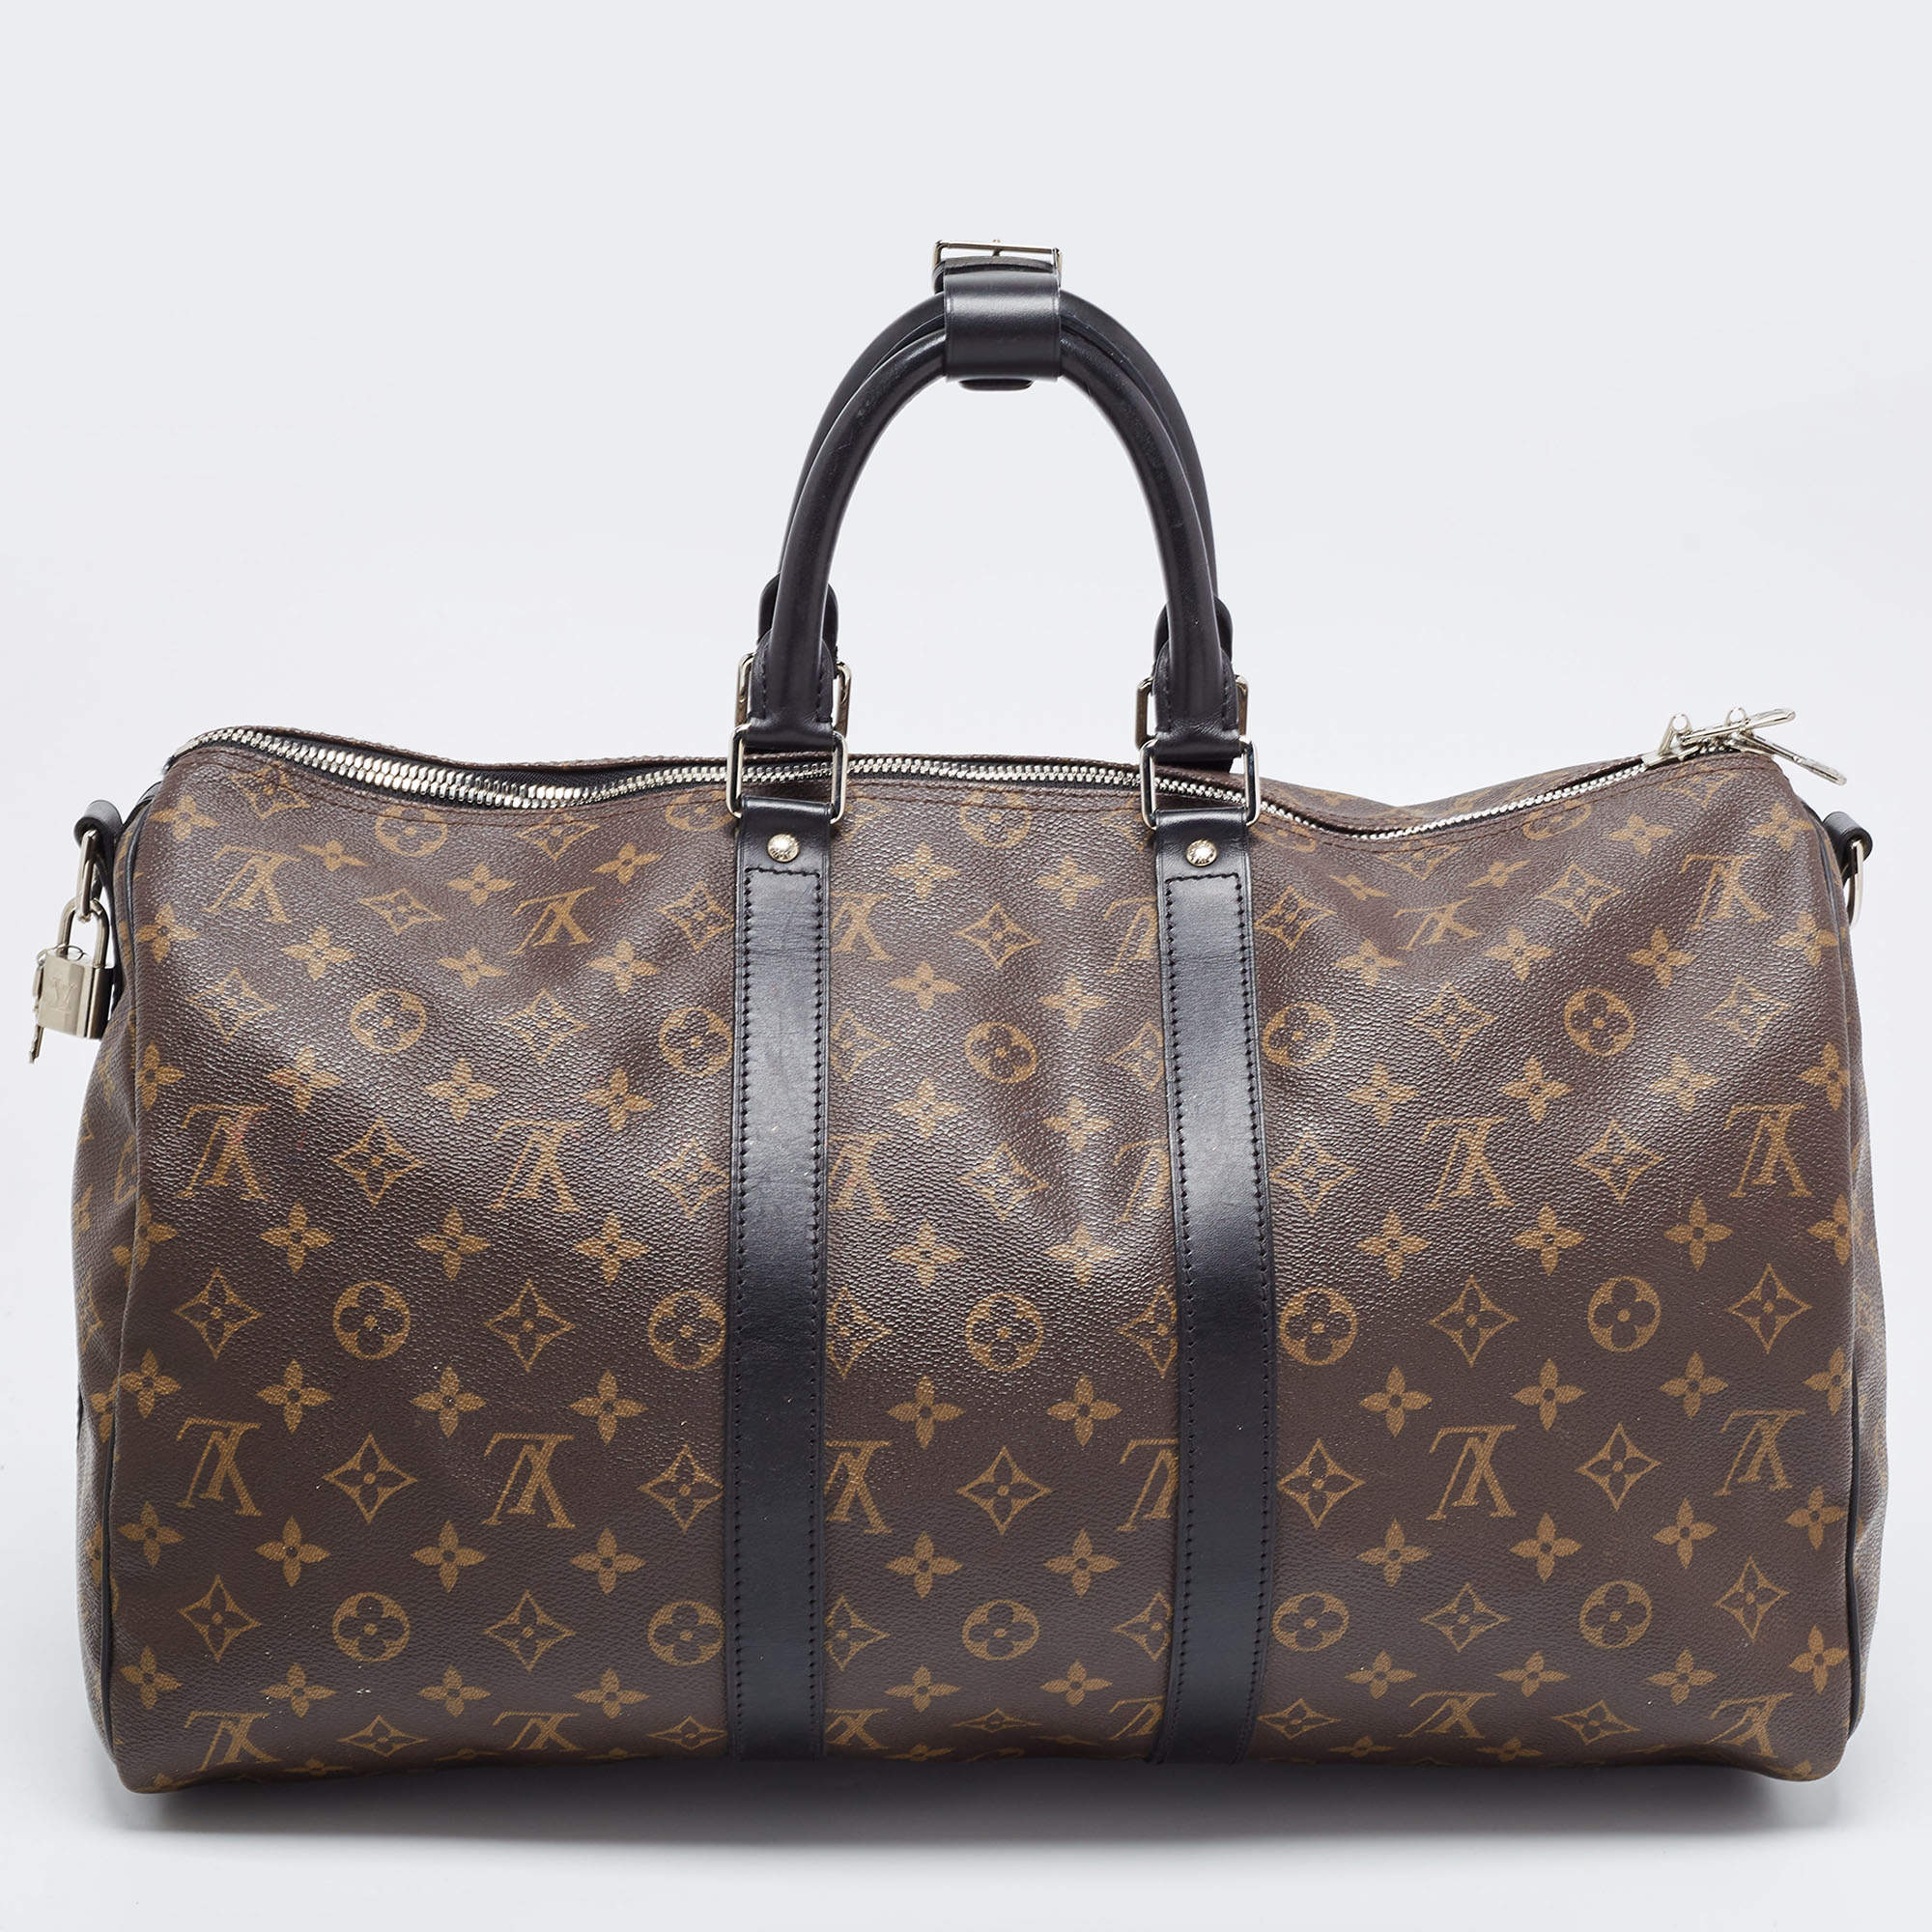 LEATHER Printed LOUIS VUITTON MONOGRAM KEEPALL BANDOULIERE DUFFLE BAG BROWN  RED